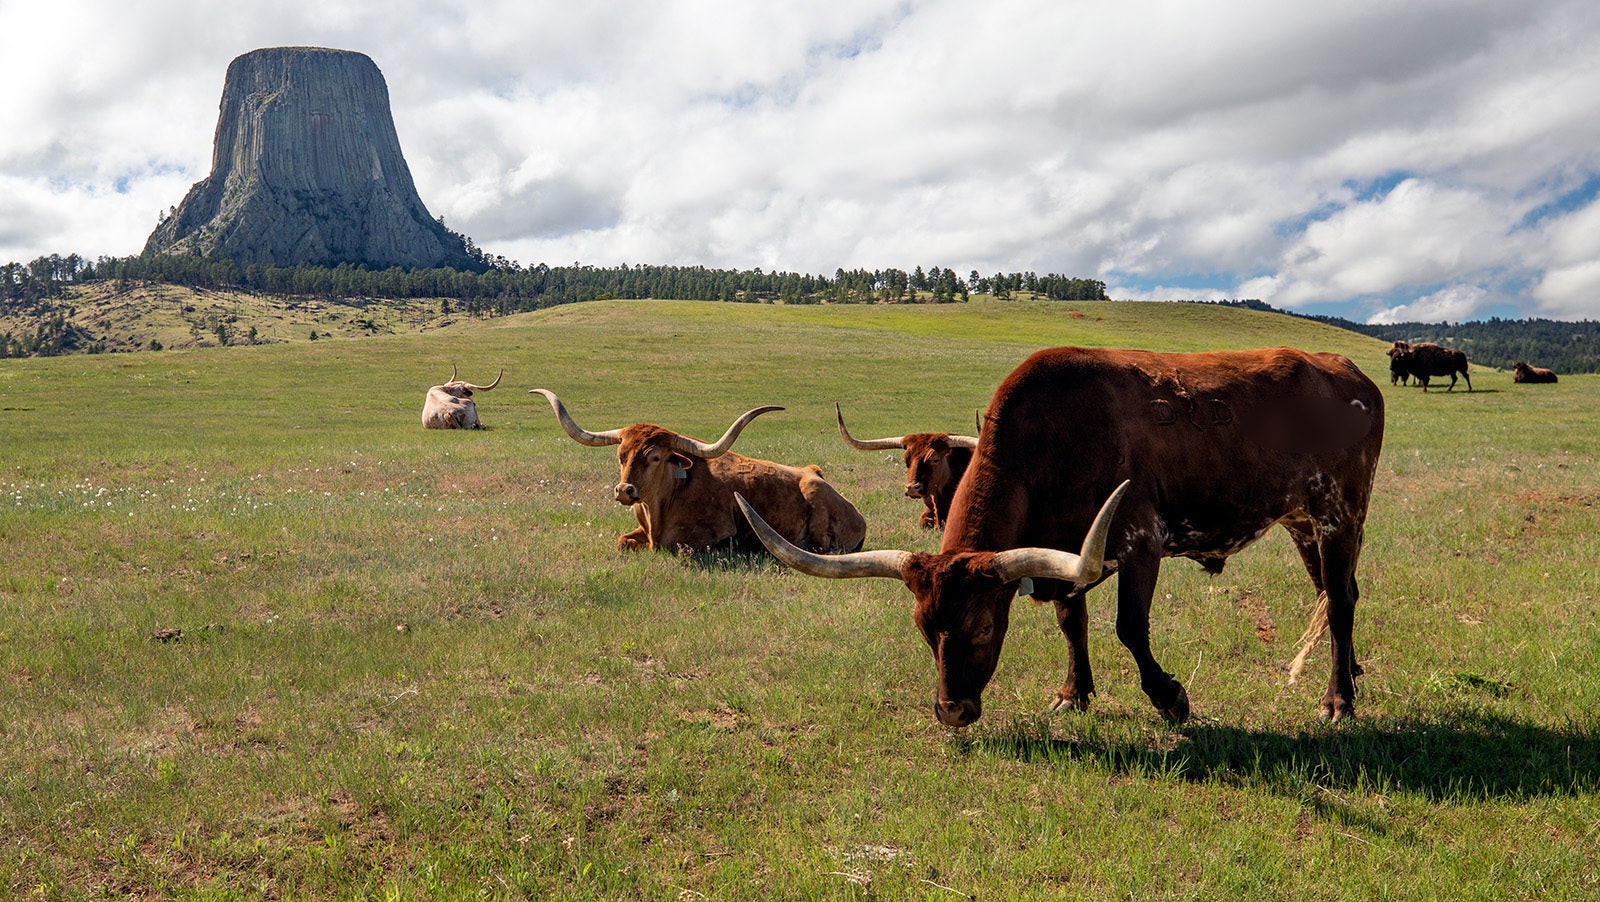 File photo of longhorn cattle in a field near Devils Tower in Crook County, Wyoming.